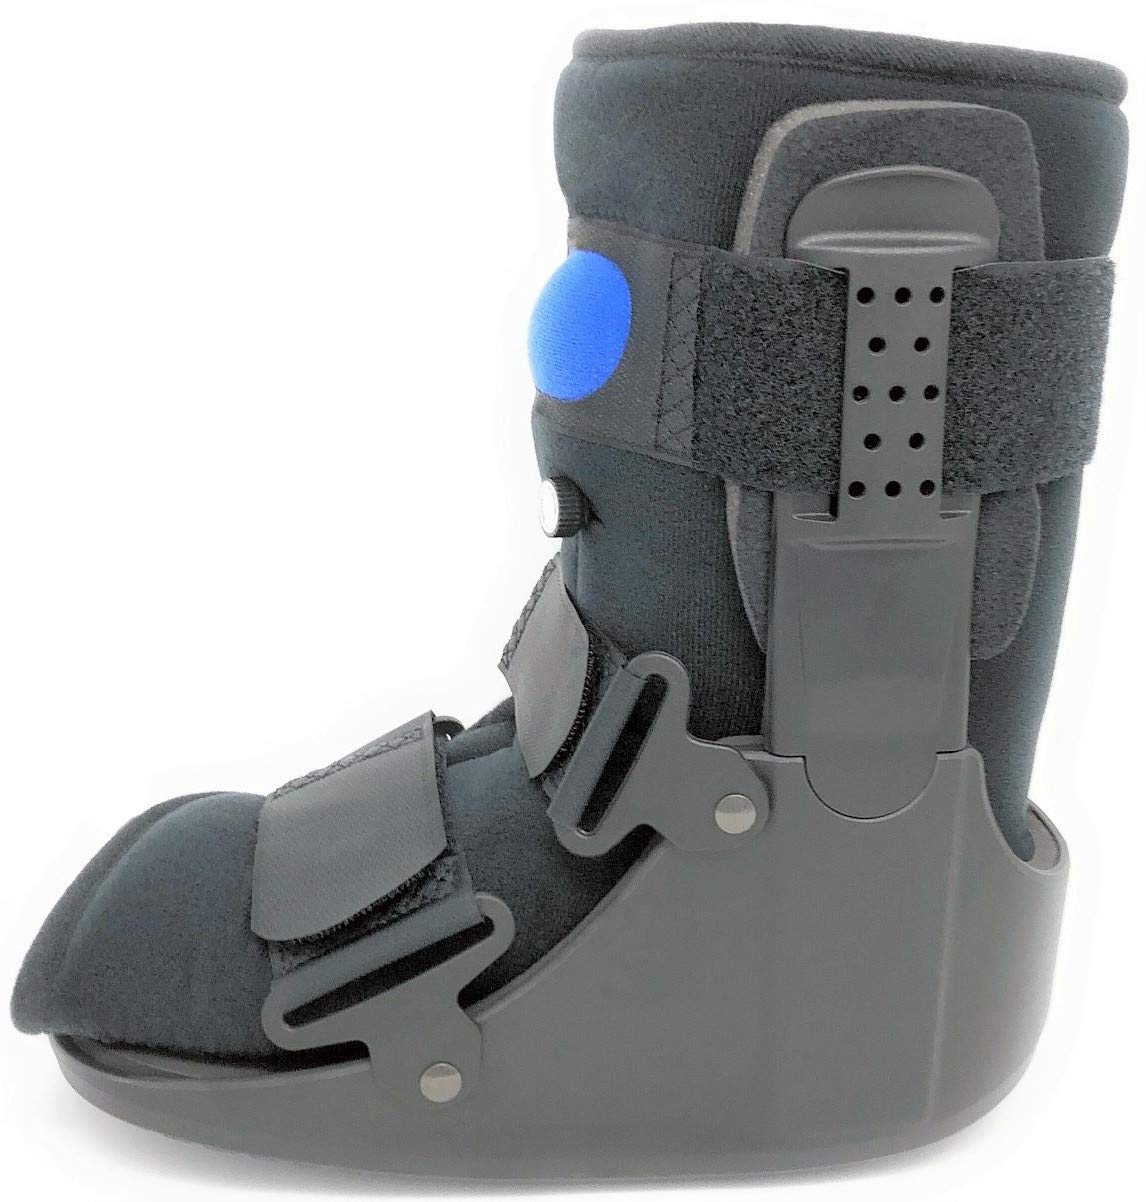 MB Medical Braces Low Top Air Fracture Boot (X-Large, L4360 and L4361), Short Air CAM Walking Brace for Foot and Ankle, Black, Men's Shoe Size ...